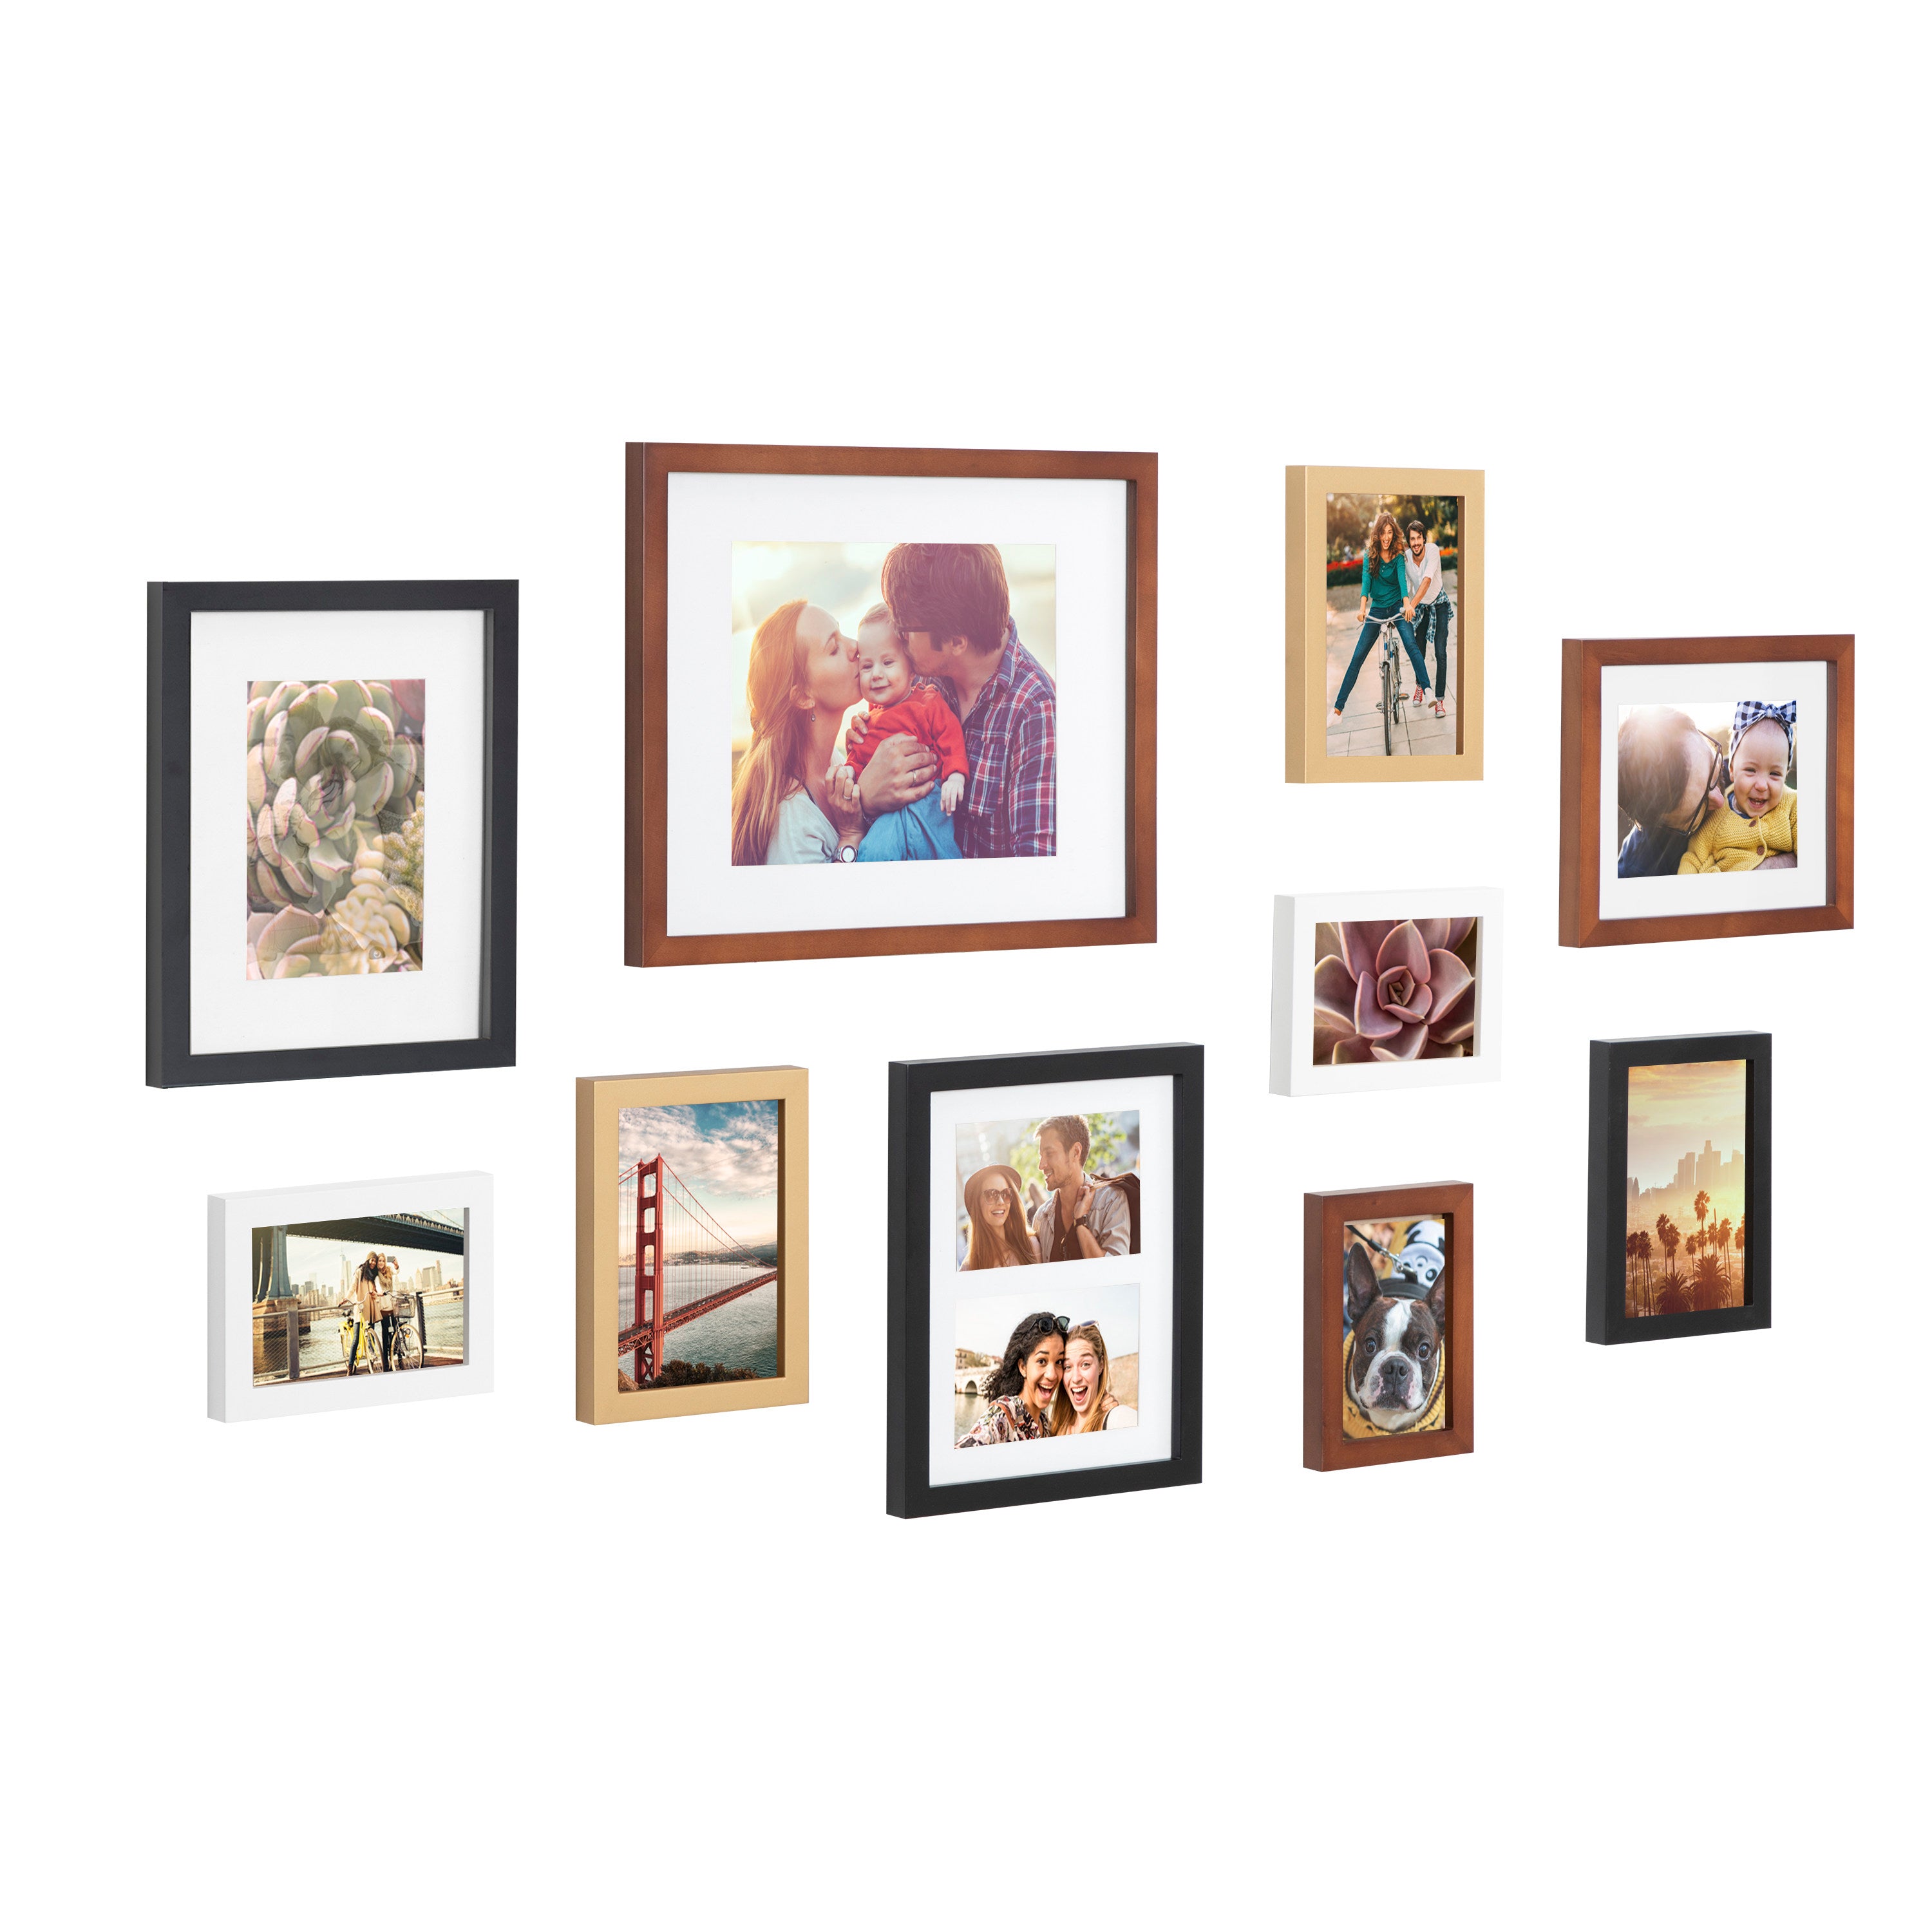 Kate and Laurel Gallery 10-Piece Wall Picture Frame Kit, Set of 10